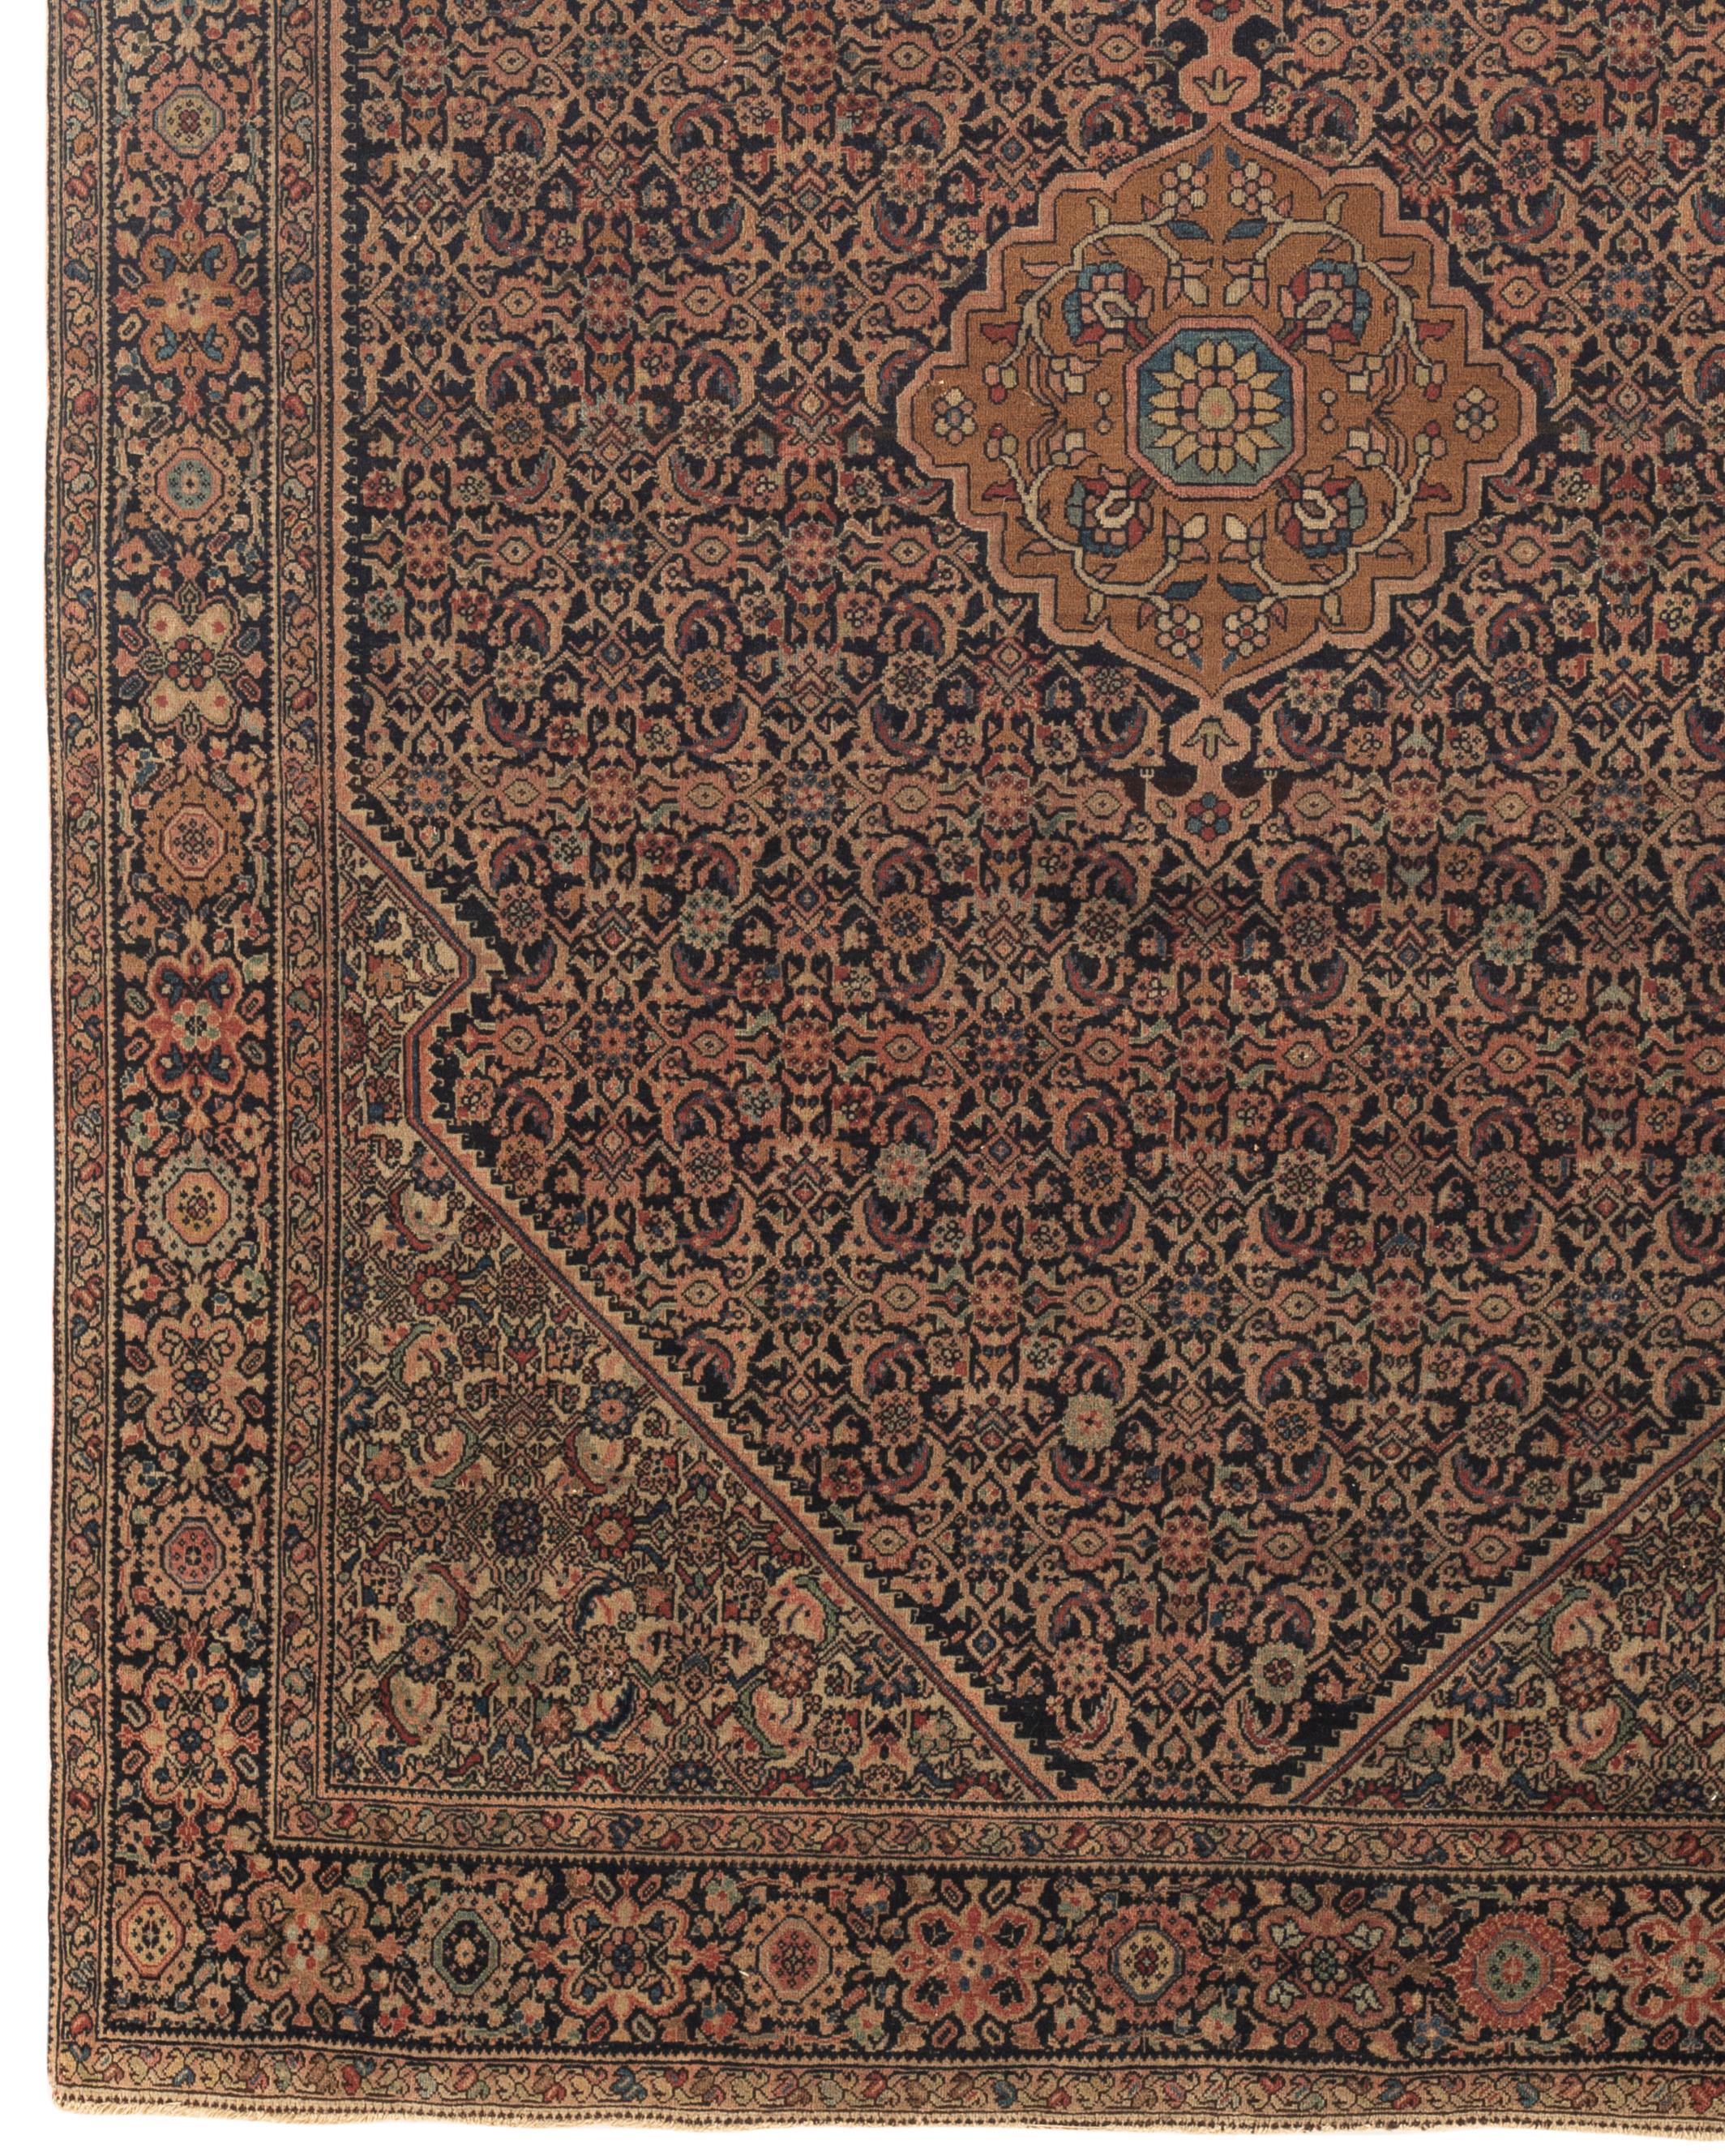 Antique Farahan Sarouk rug, circa 1880. Sarouk rugs come from west central Persia. On a navy field and border this rug expresses strength and style with its detailed floral designs scattered over the entire piece creating a wonderful visual setting